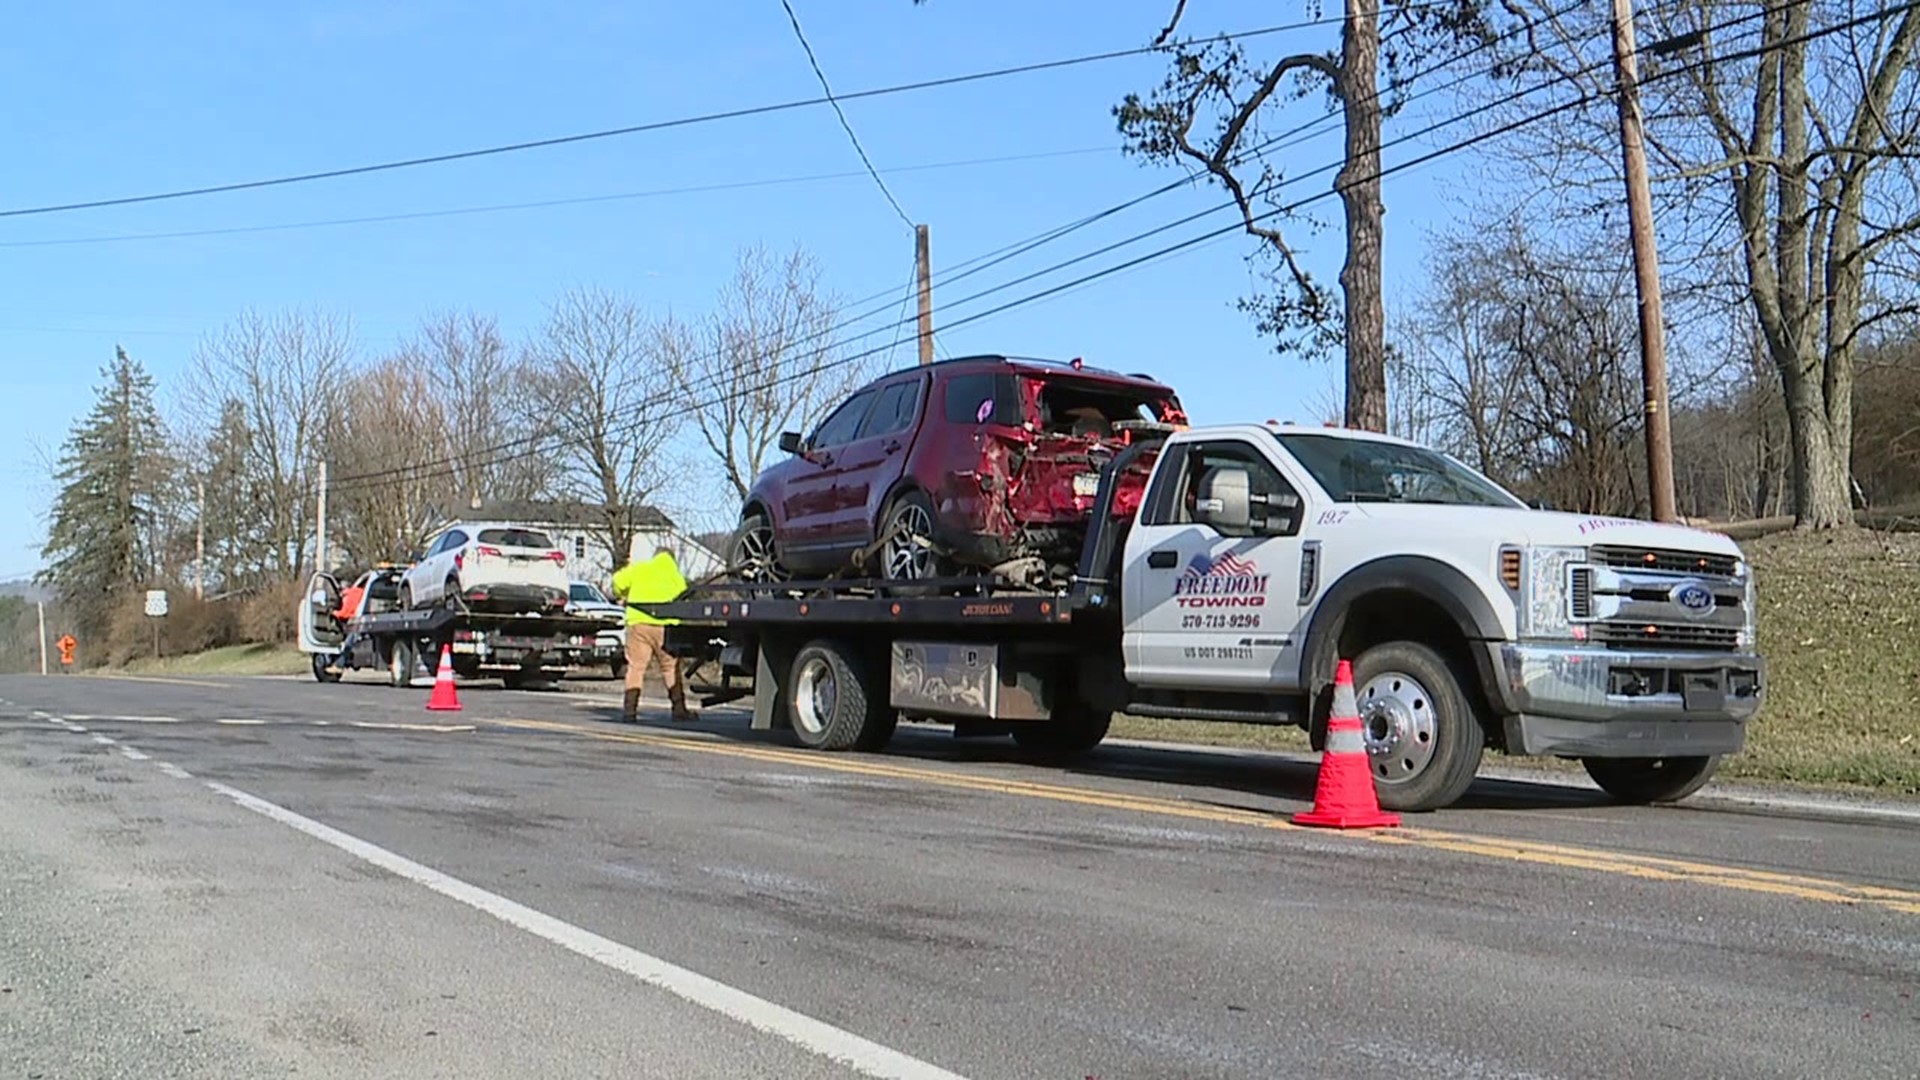 The crash happened just after 8 a.m. at the intersection of Lime Bluff Road and Route 220 near Hughesville.